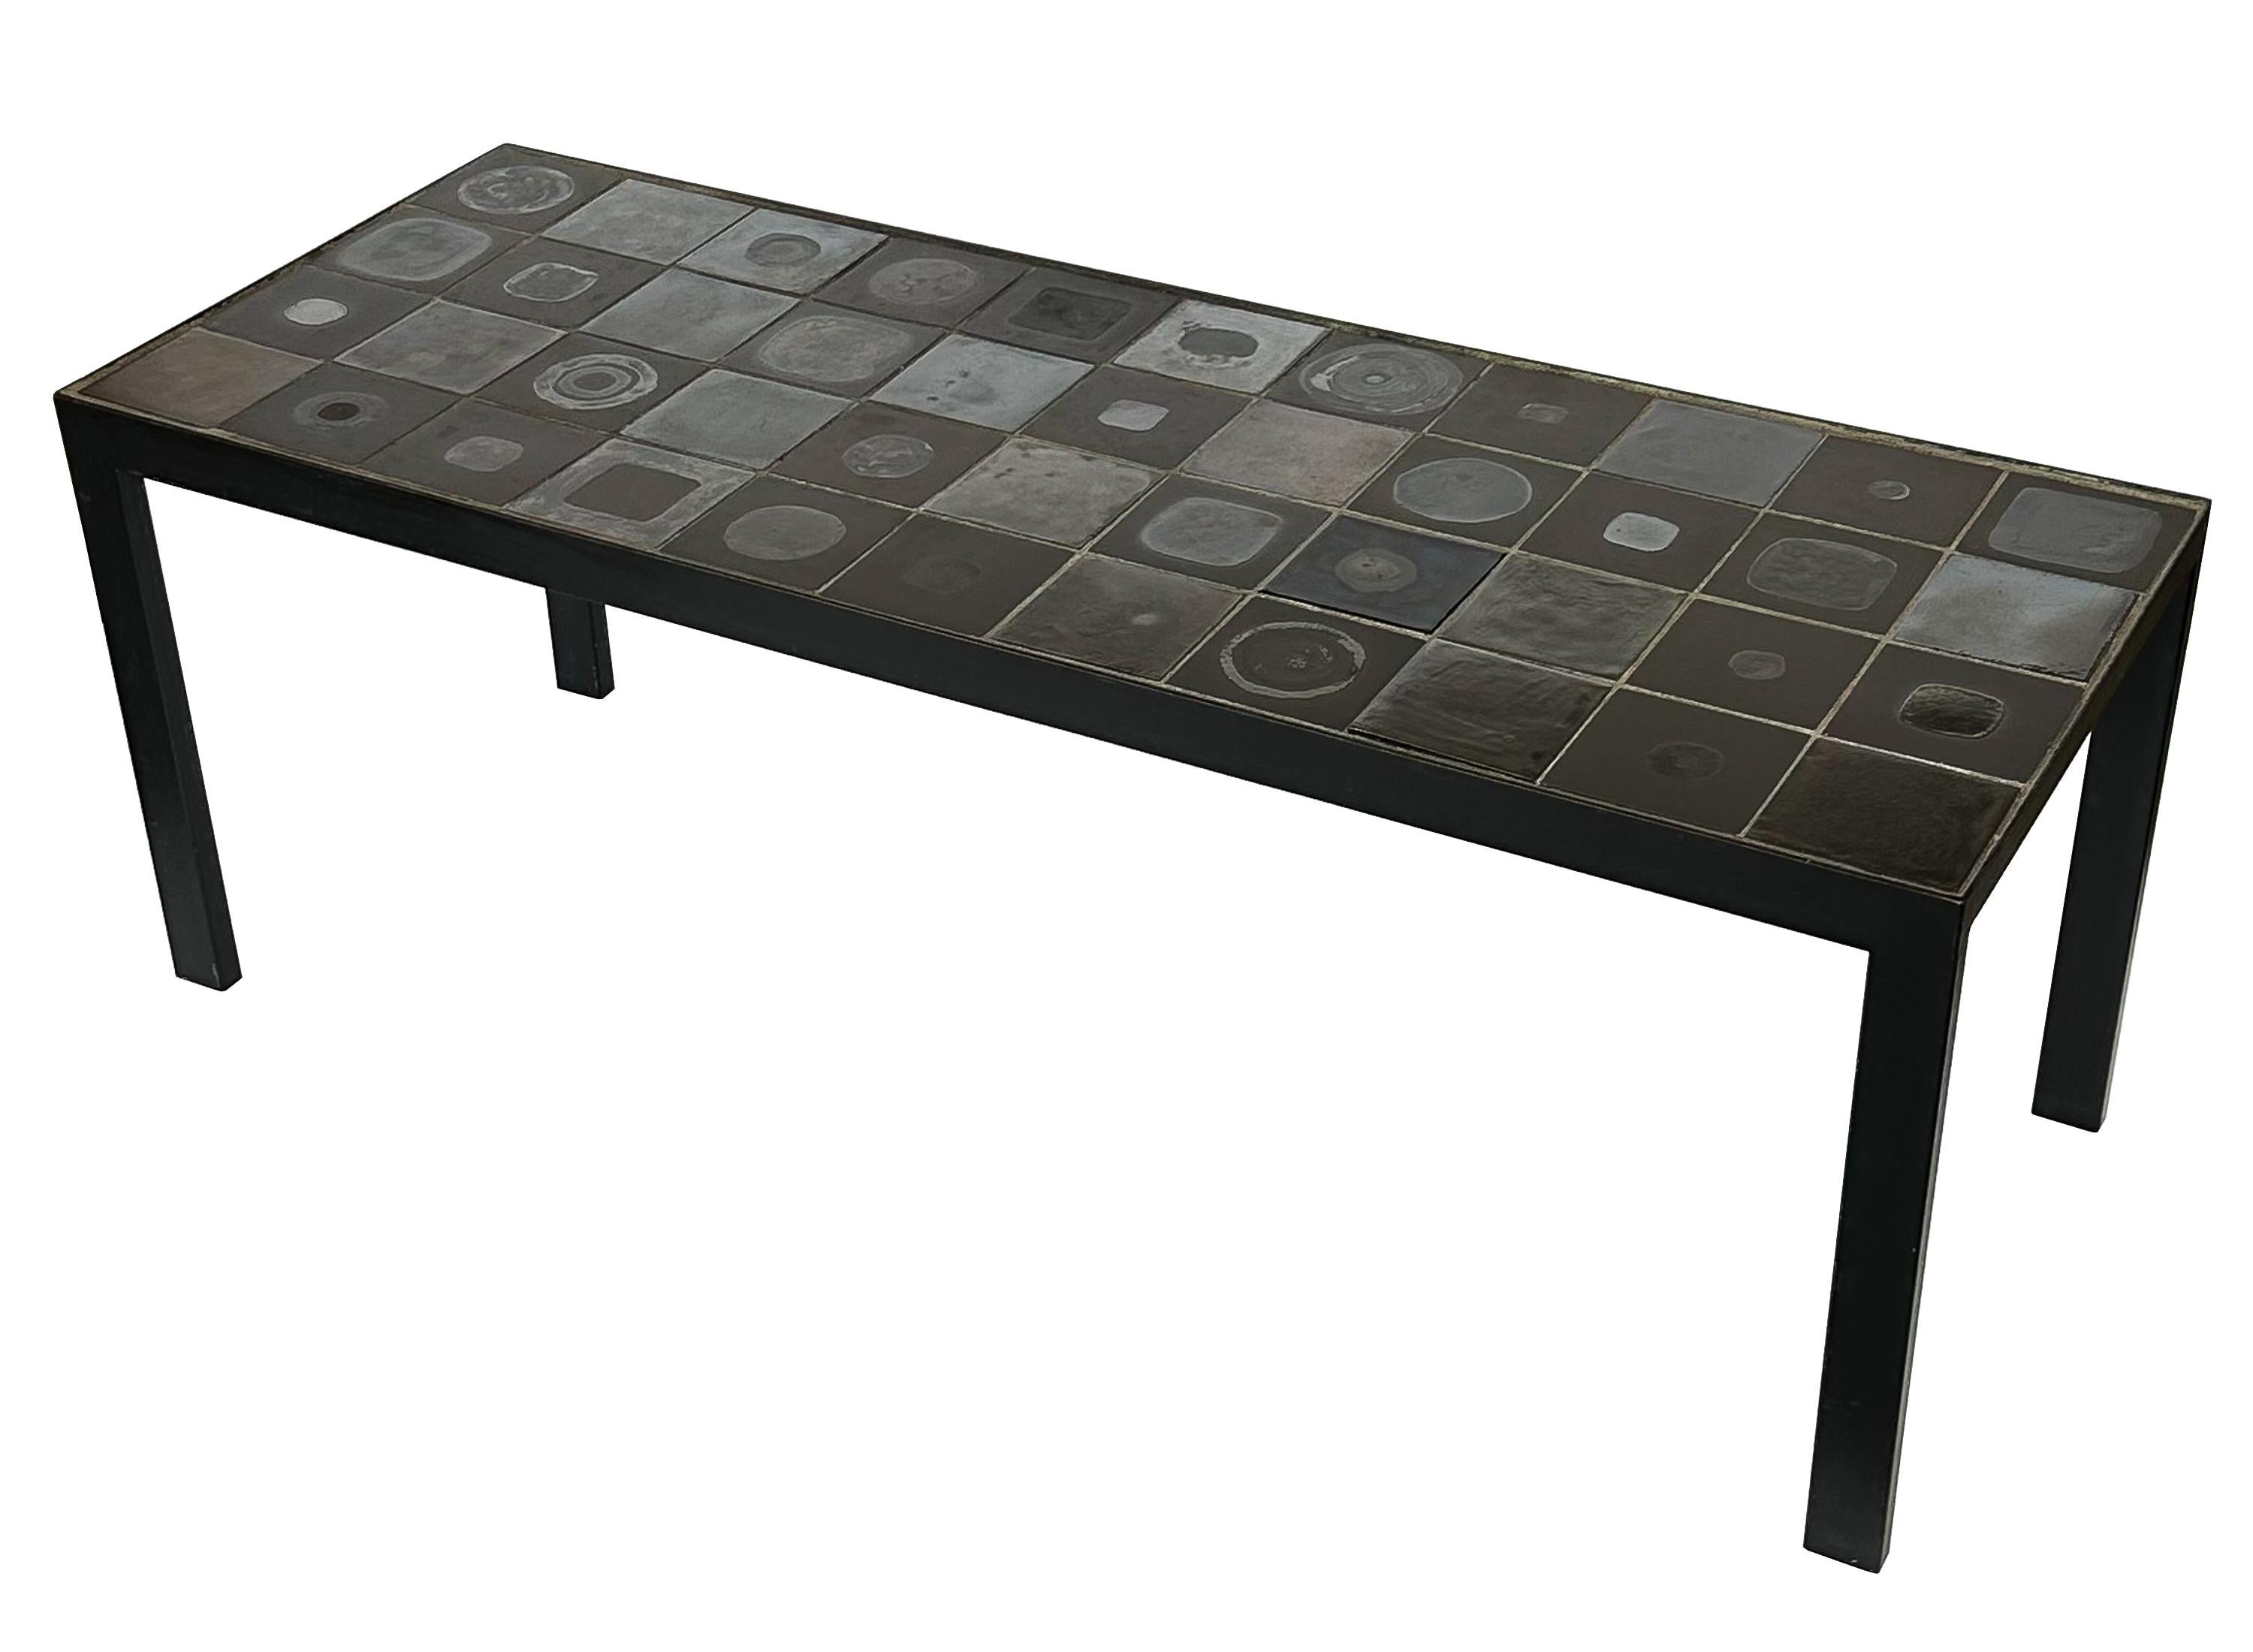 A Belgian ceramic tile top coffee table (signed), Belgium circa 1960s. This narrow coffee table features a black painted steel frame inset with 44 handmade metallic glazed ceramic tiles in a simple grid. Each tile is unique and measures